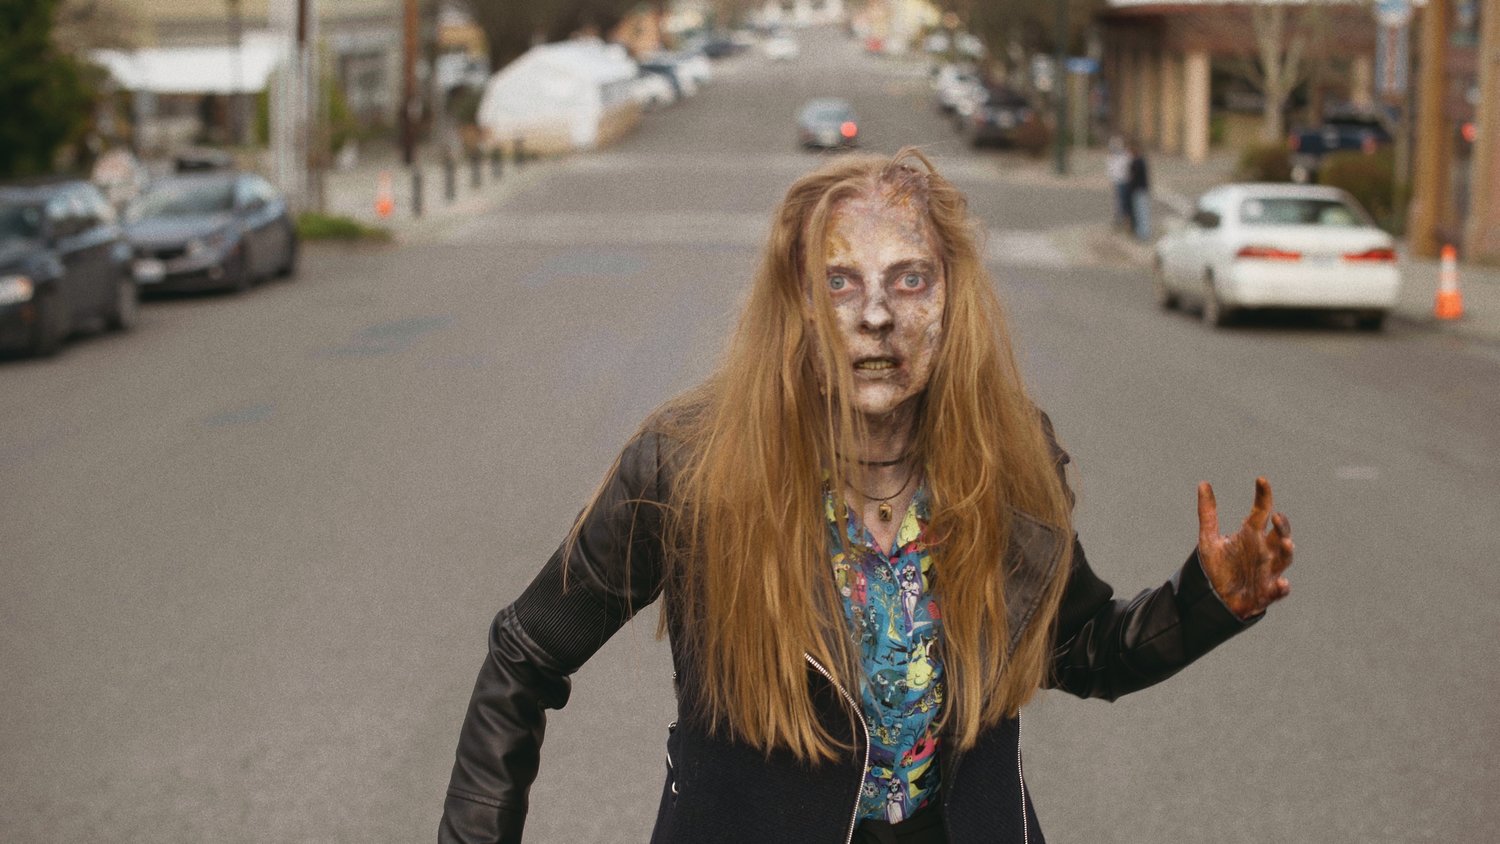 Filmed from March 2021 to May 2021, “Lifeless” was primarily shot in Port Townsend.